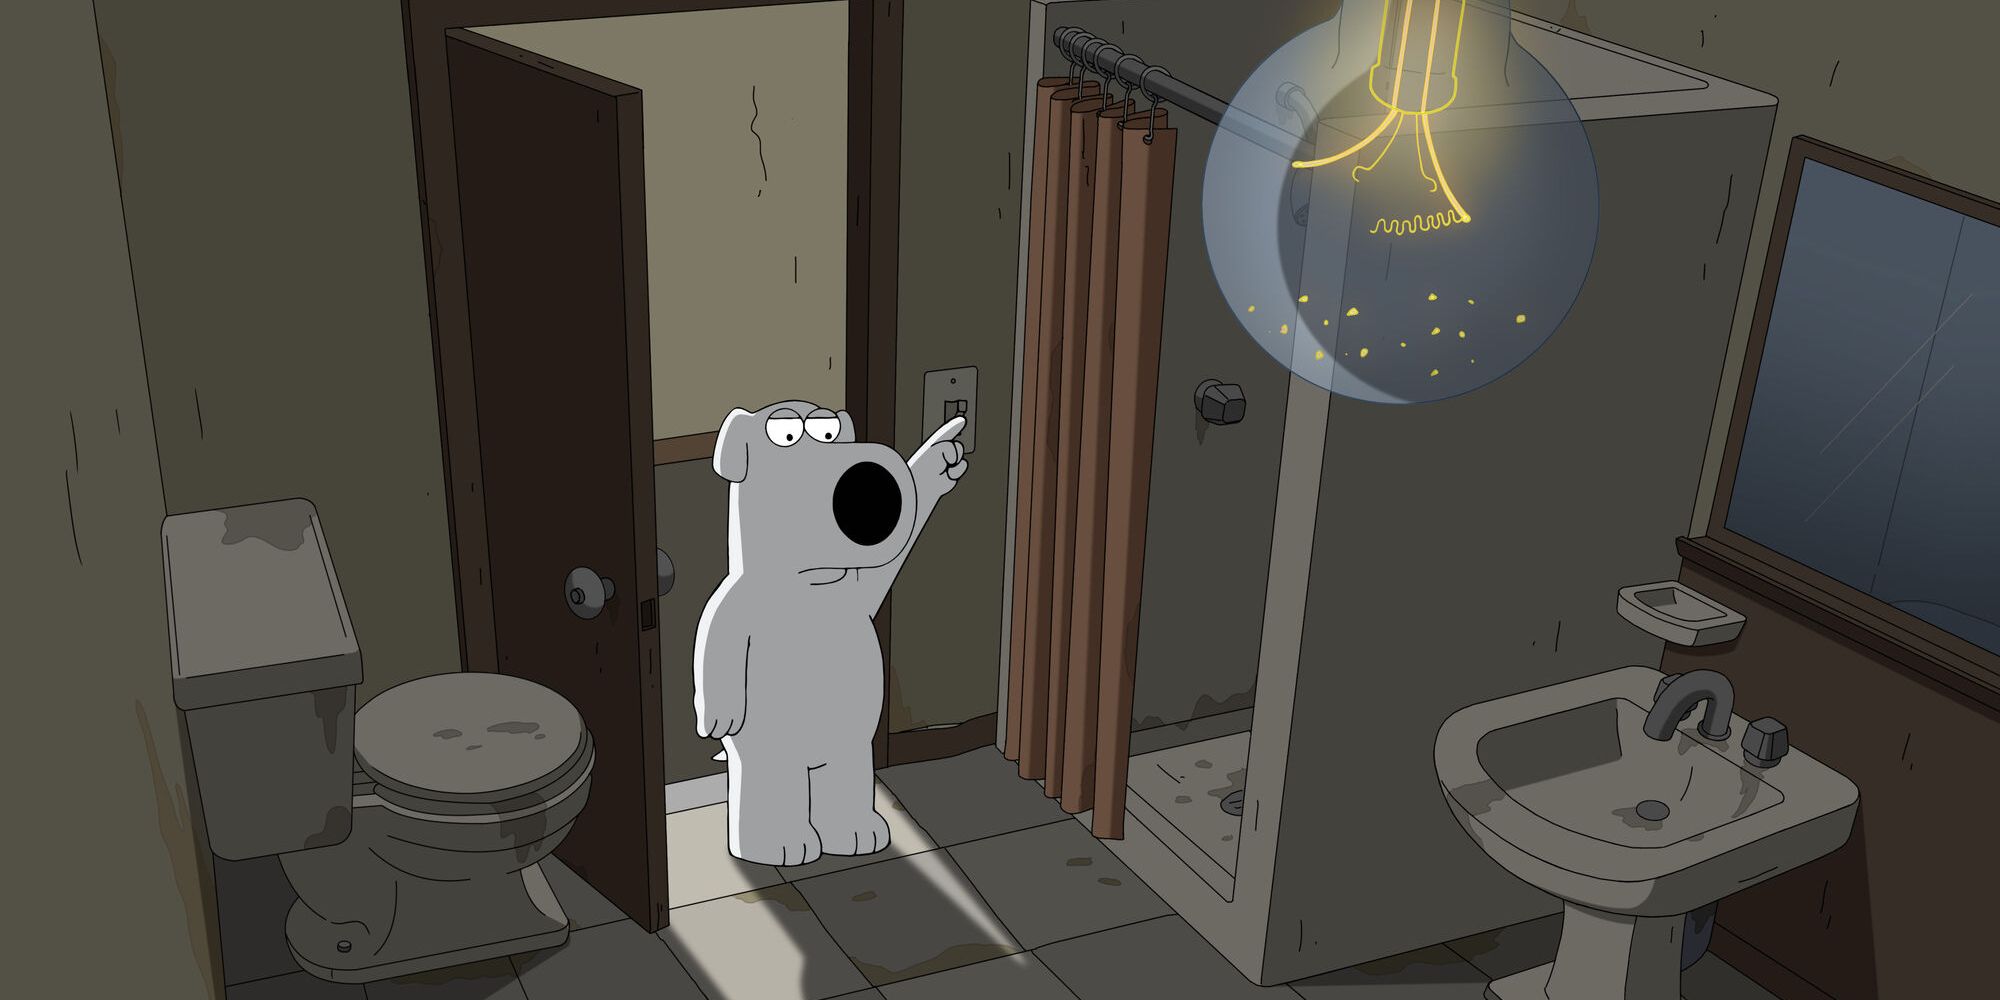 A still from the Family Guy episode "The D in Apartment 23."